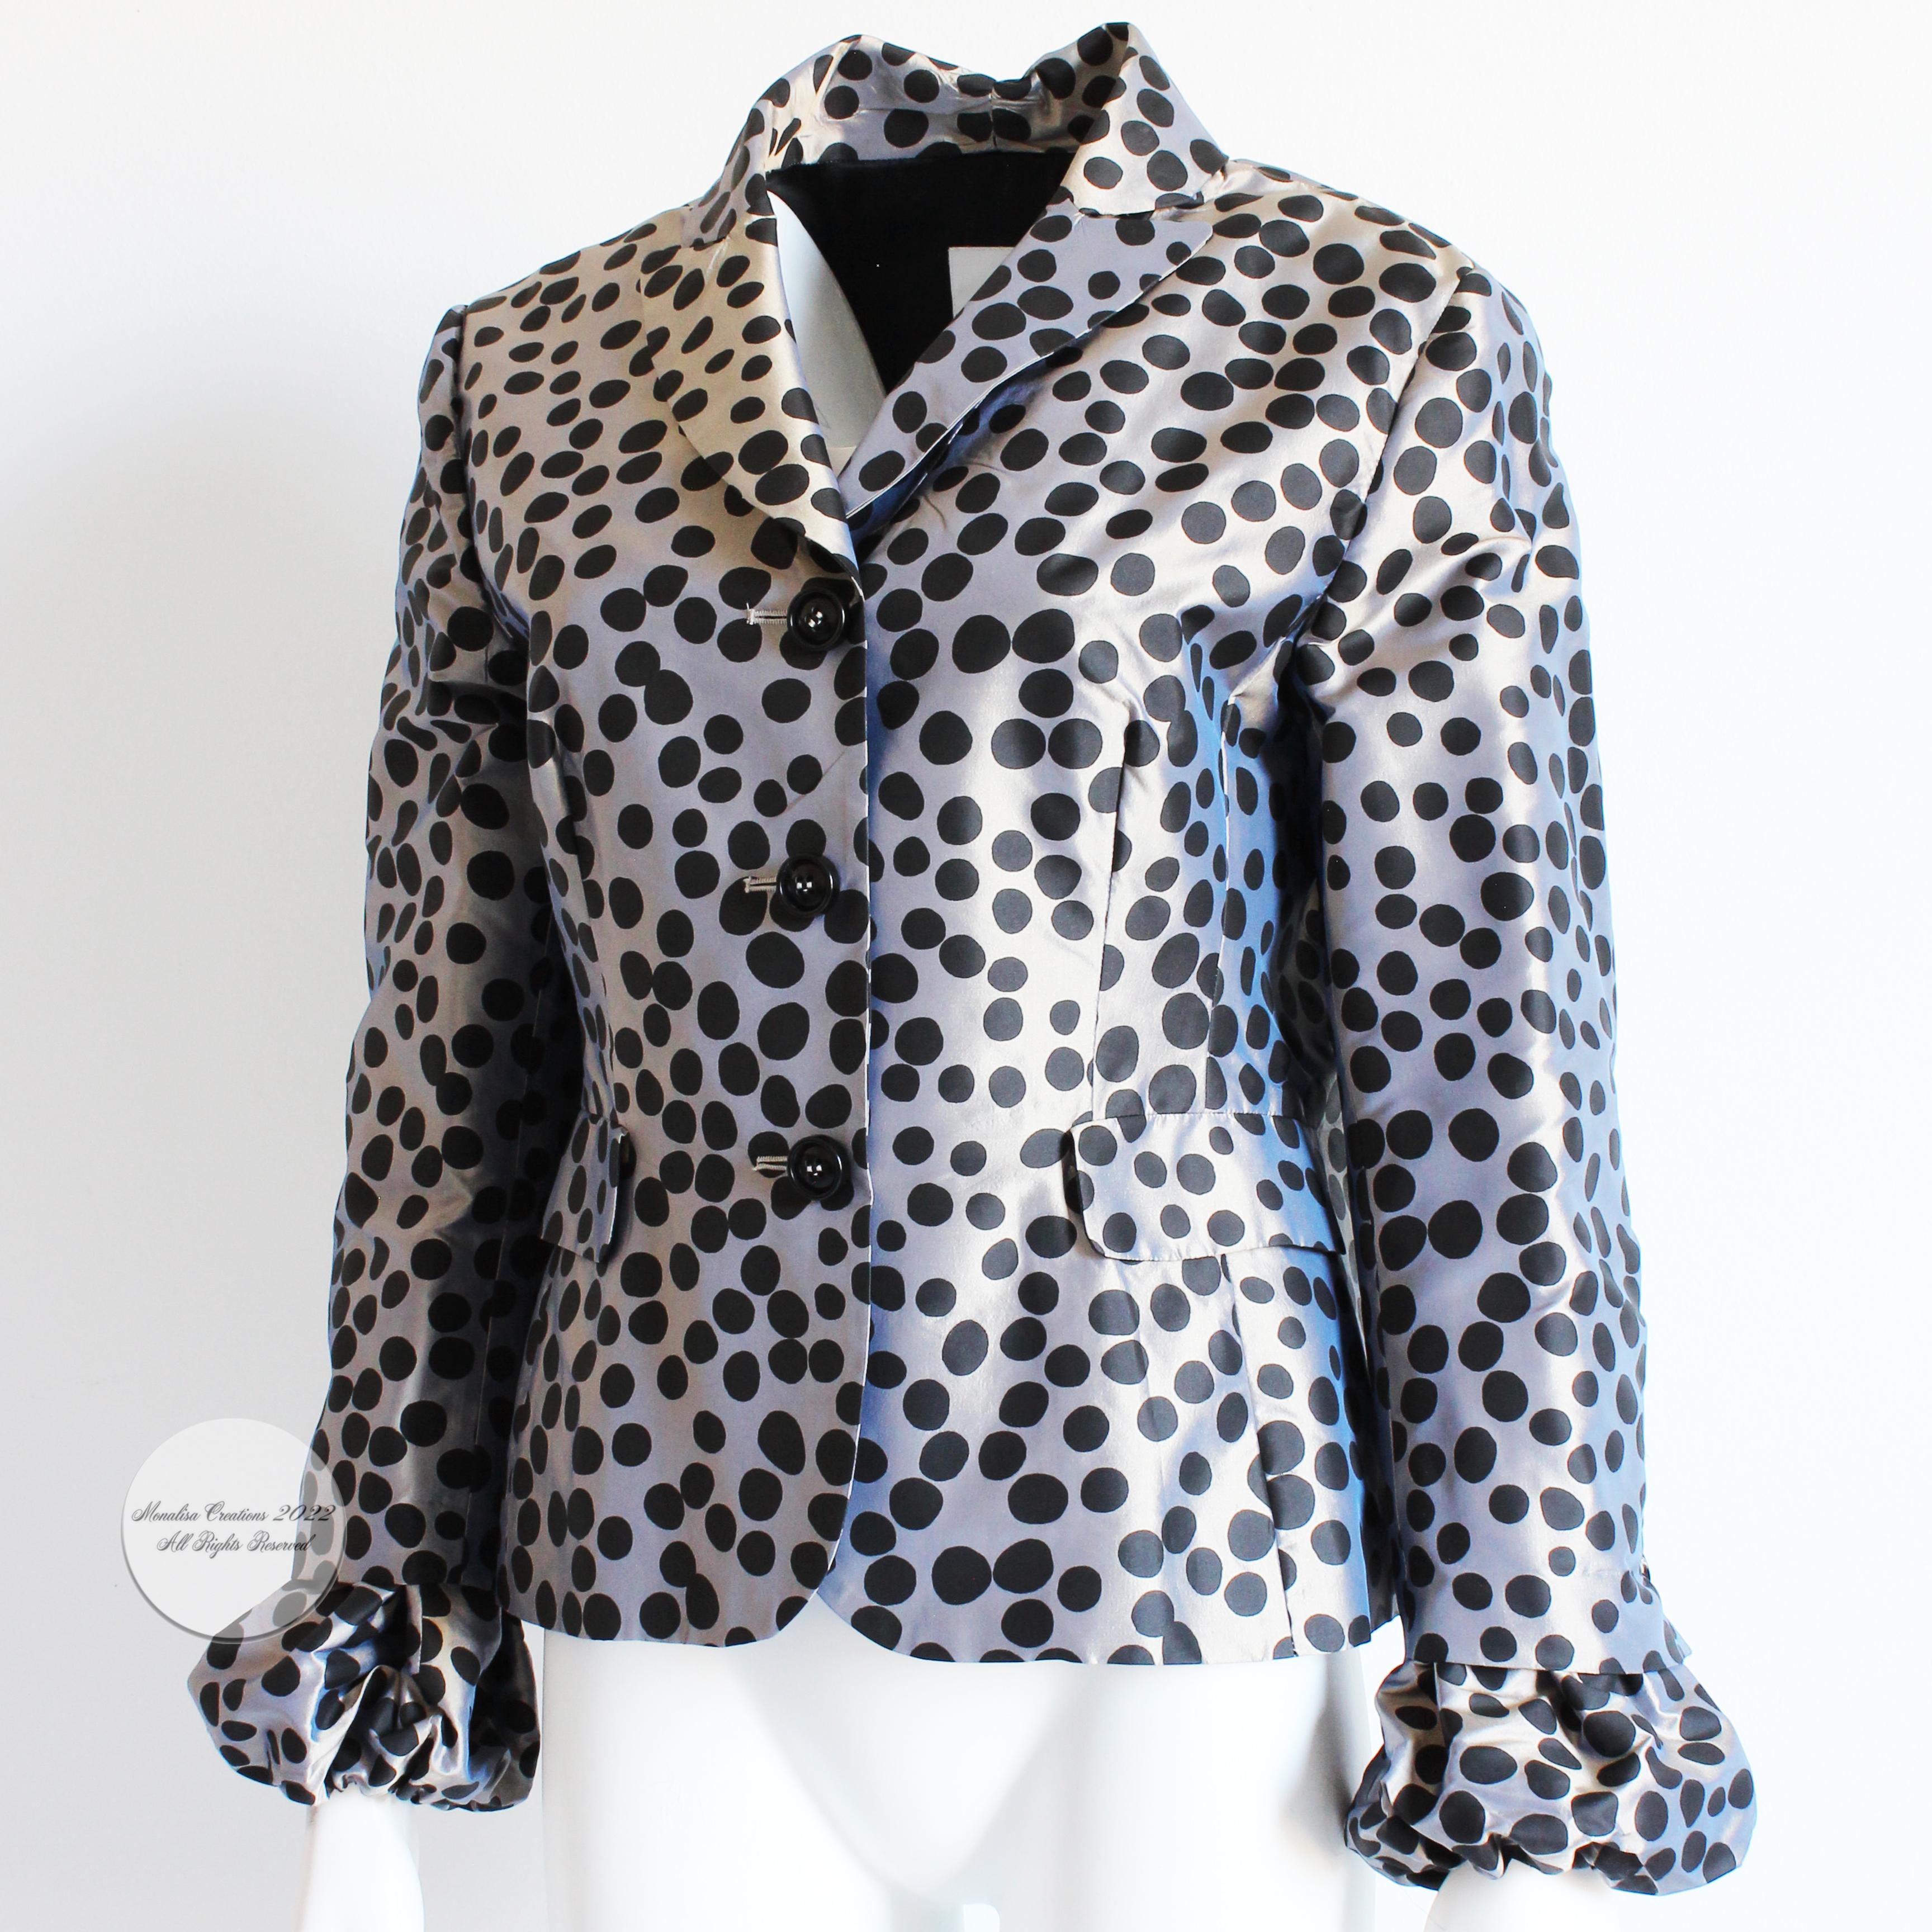 Moschino Jacket Gunmetal Silk with Polka Dots Puff Sleeves Cheap and Chic US 12 2